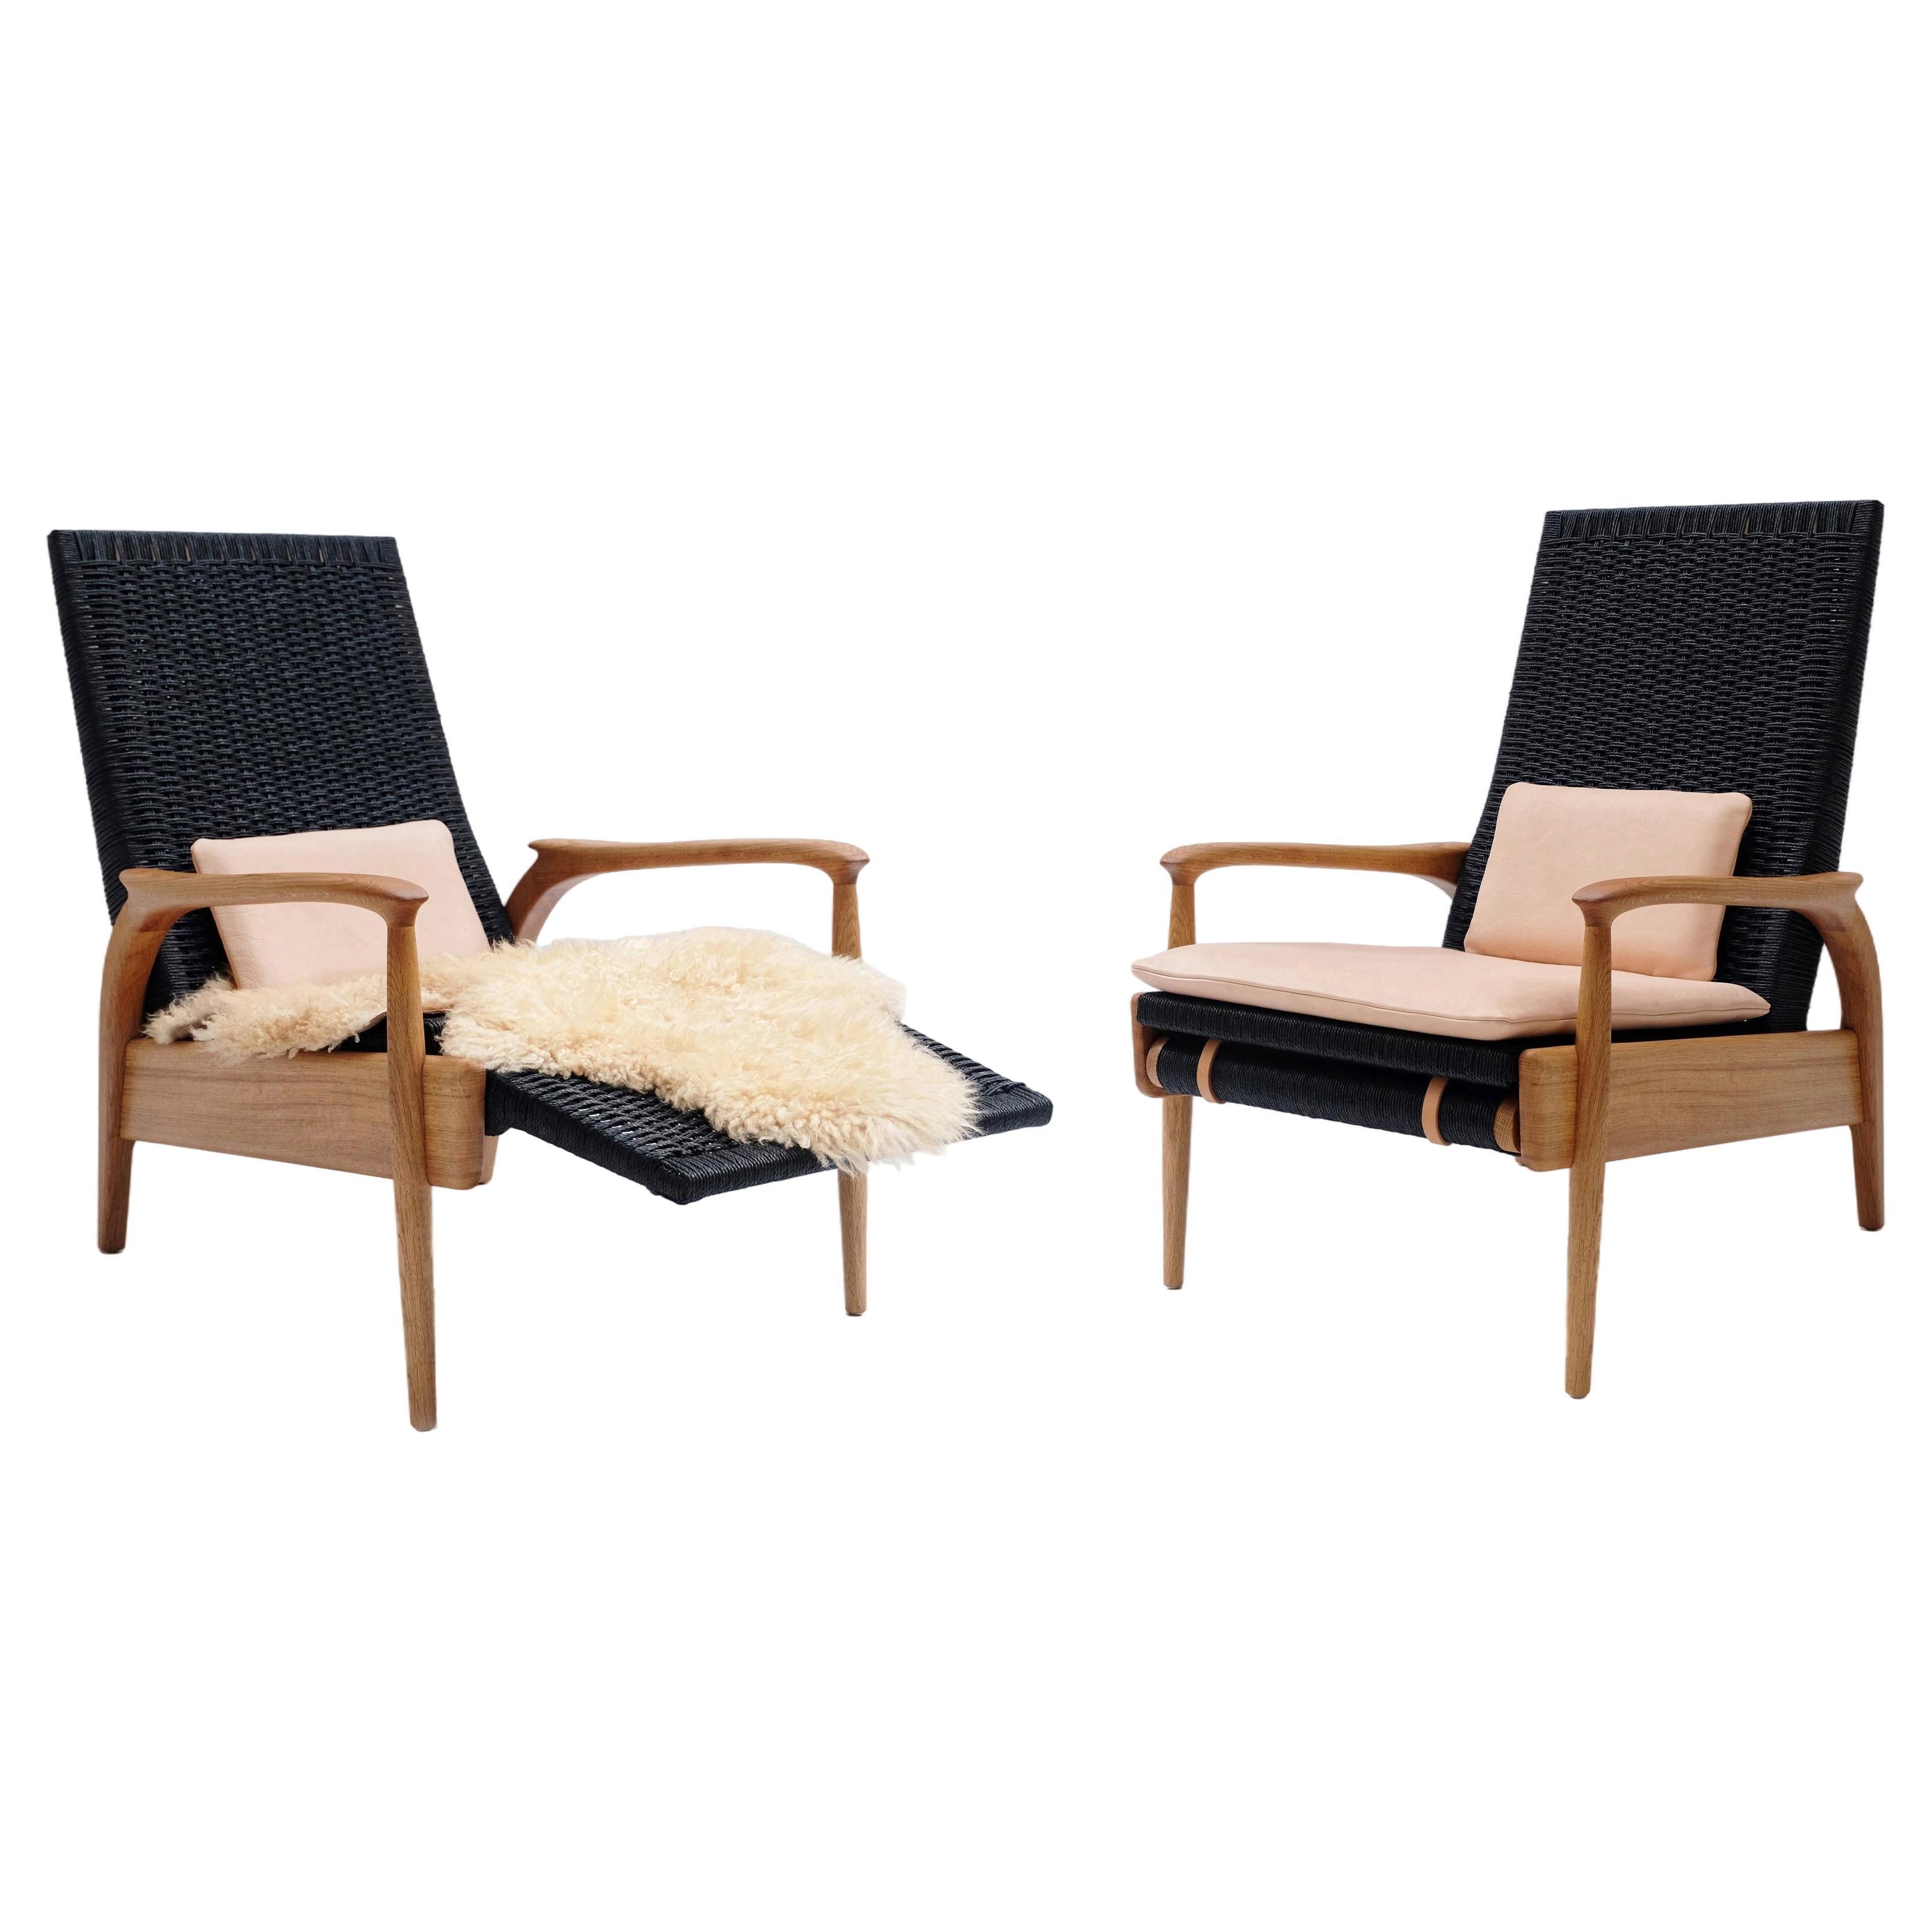 Pair of Reclining Armchairs, Solid Oak, Black Danish Cord, Leather Cushions